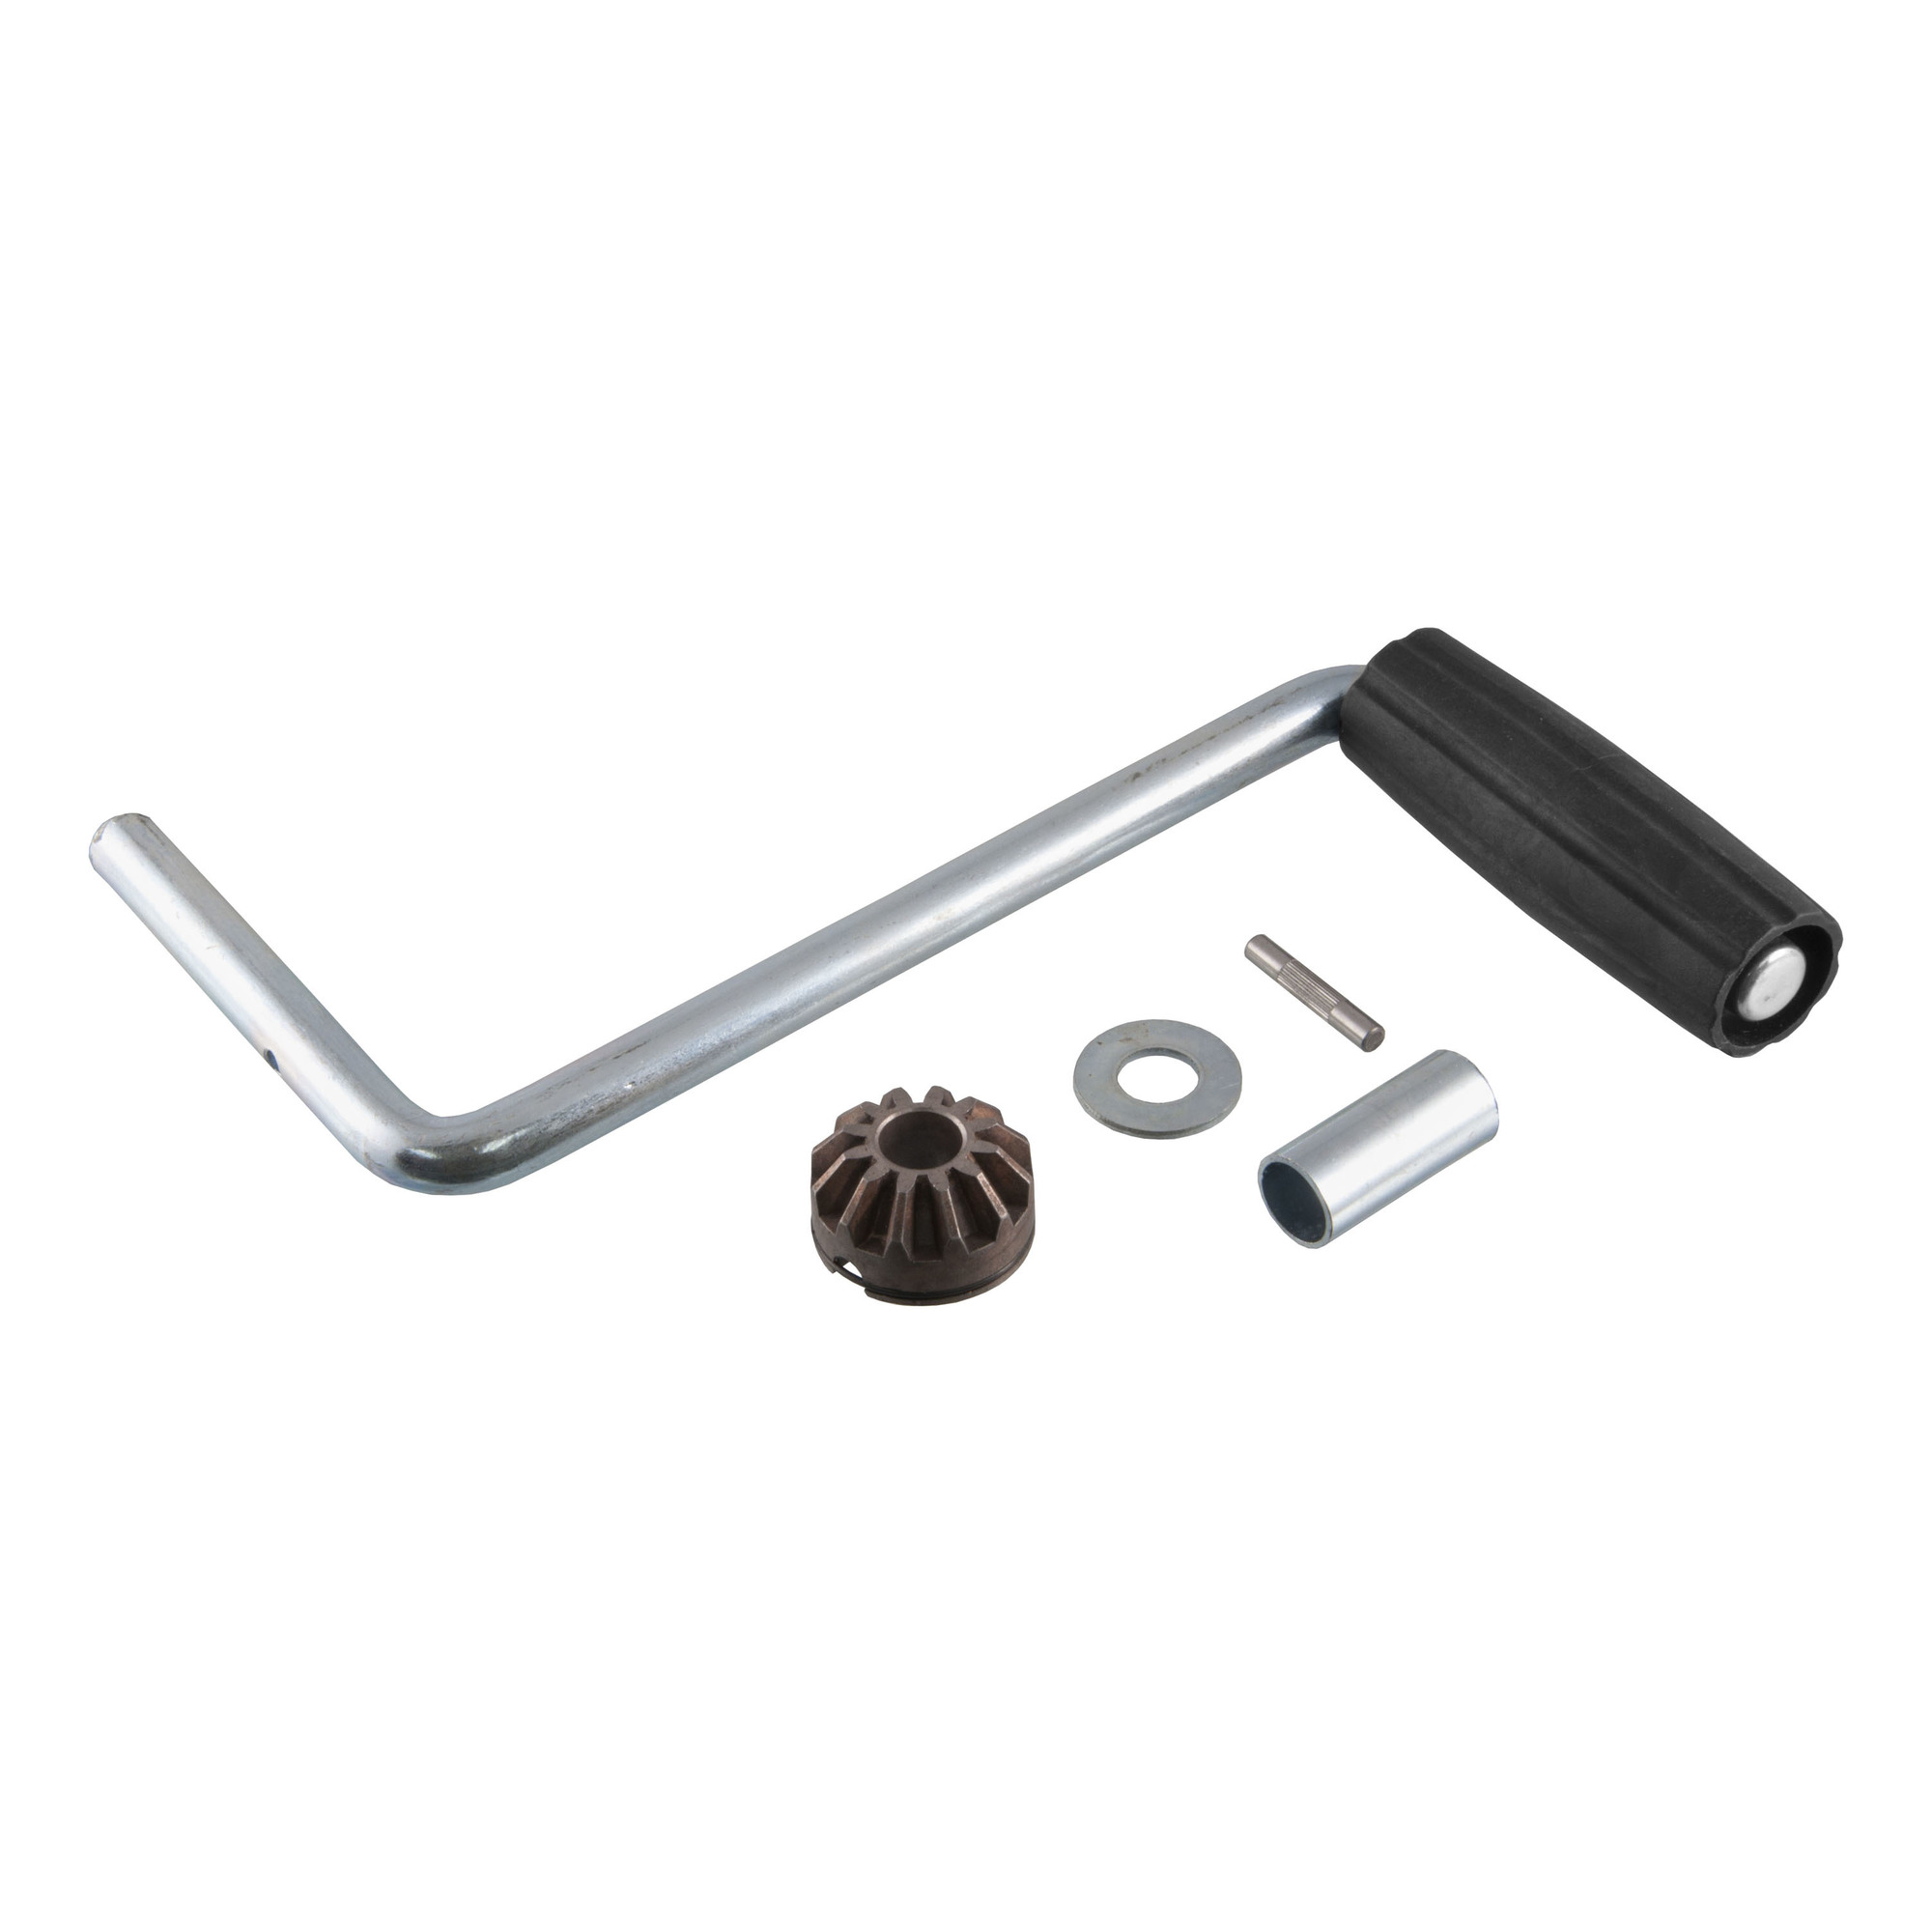 Curt Manufacturing, Replacement Direct-Weld Square Jack Handle Kit, Model 28960